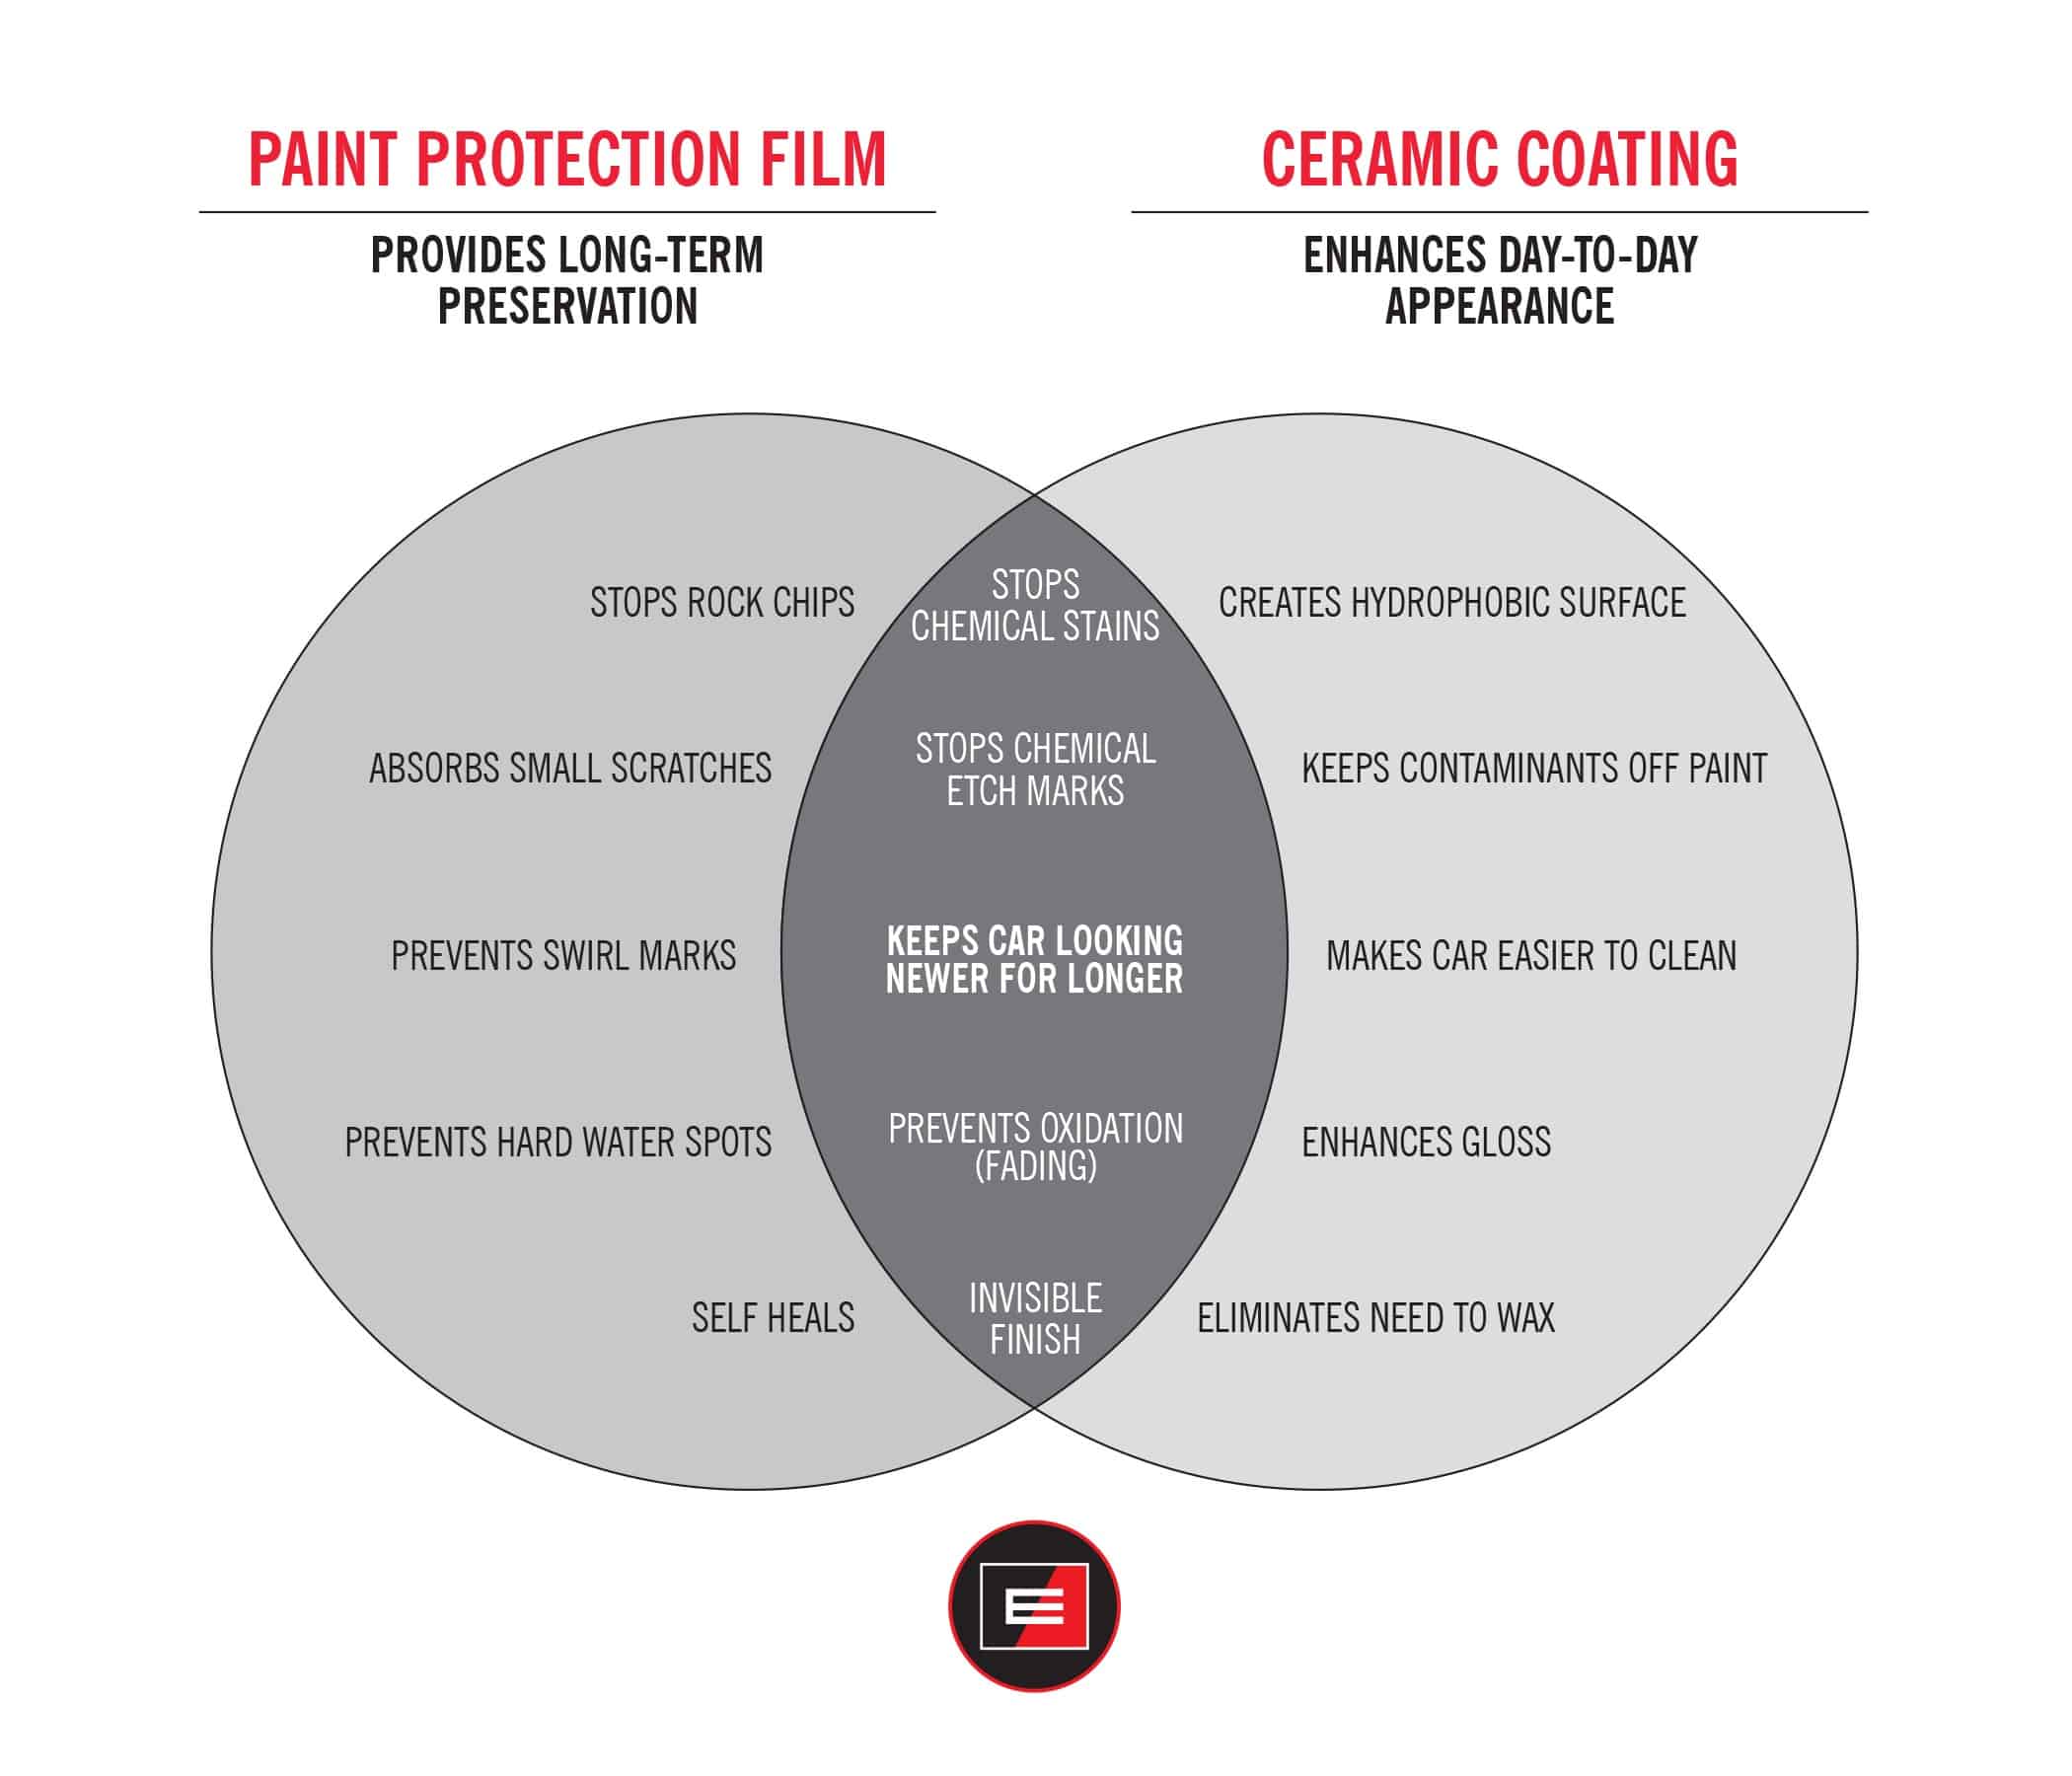 Paint Protection Film vs Ceramic Coating: What's Best?